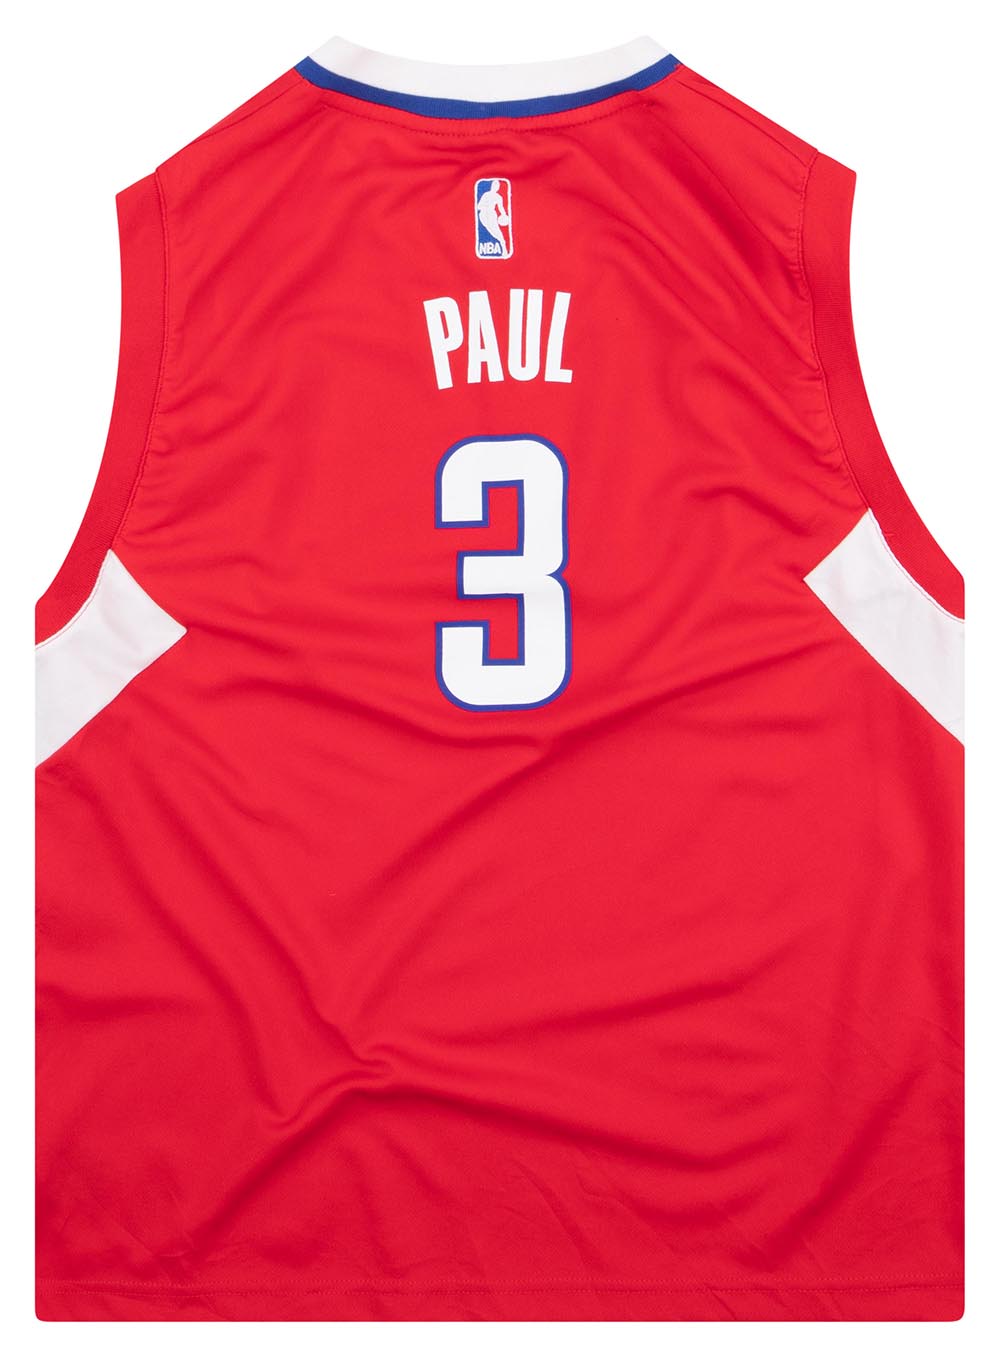 2015-17 LA CLIPPERS PAUL #3 ADIDAS JERSEY (AWAY) Y - Classic American Sports